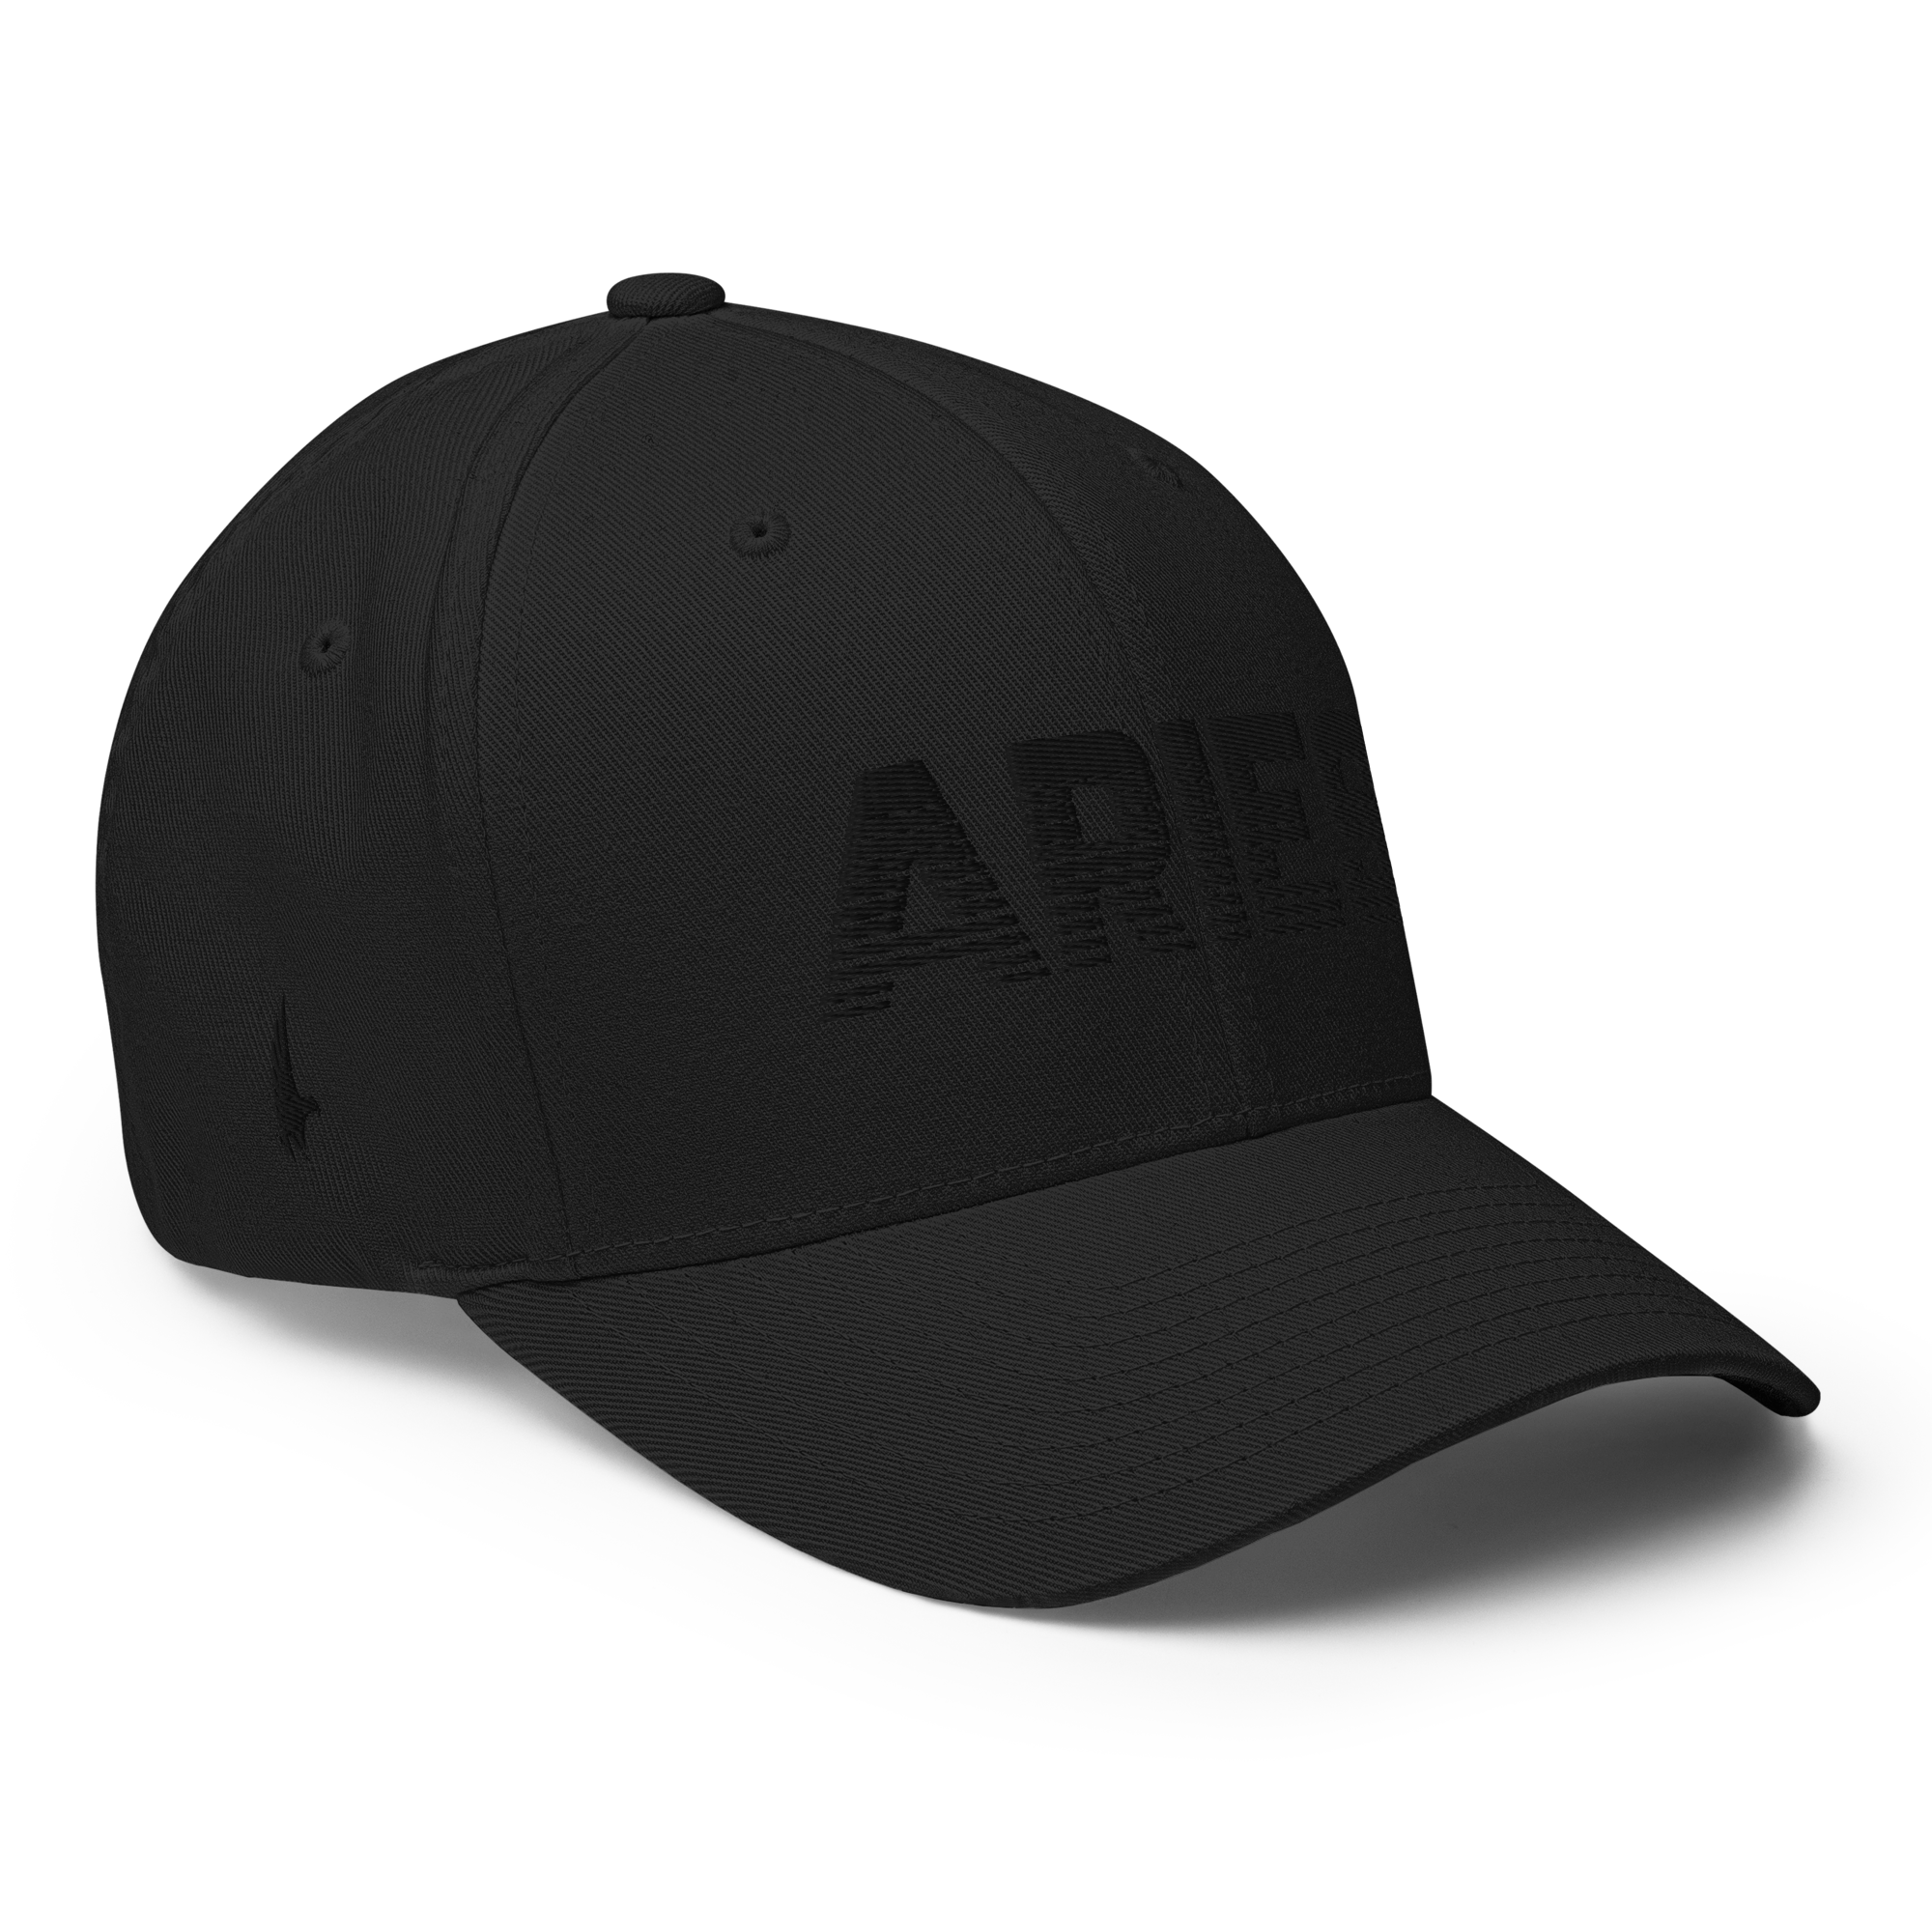 Aries Fitted Hat - Black/Black Fitted - Loyalty Vibes